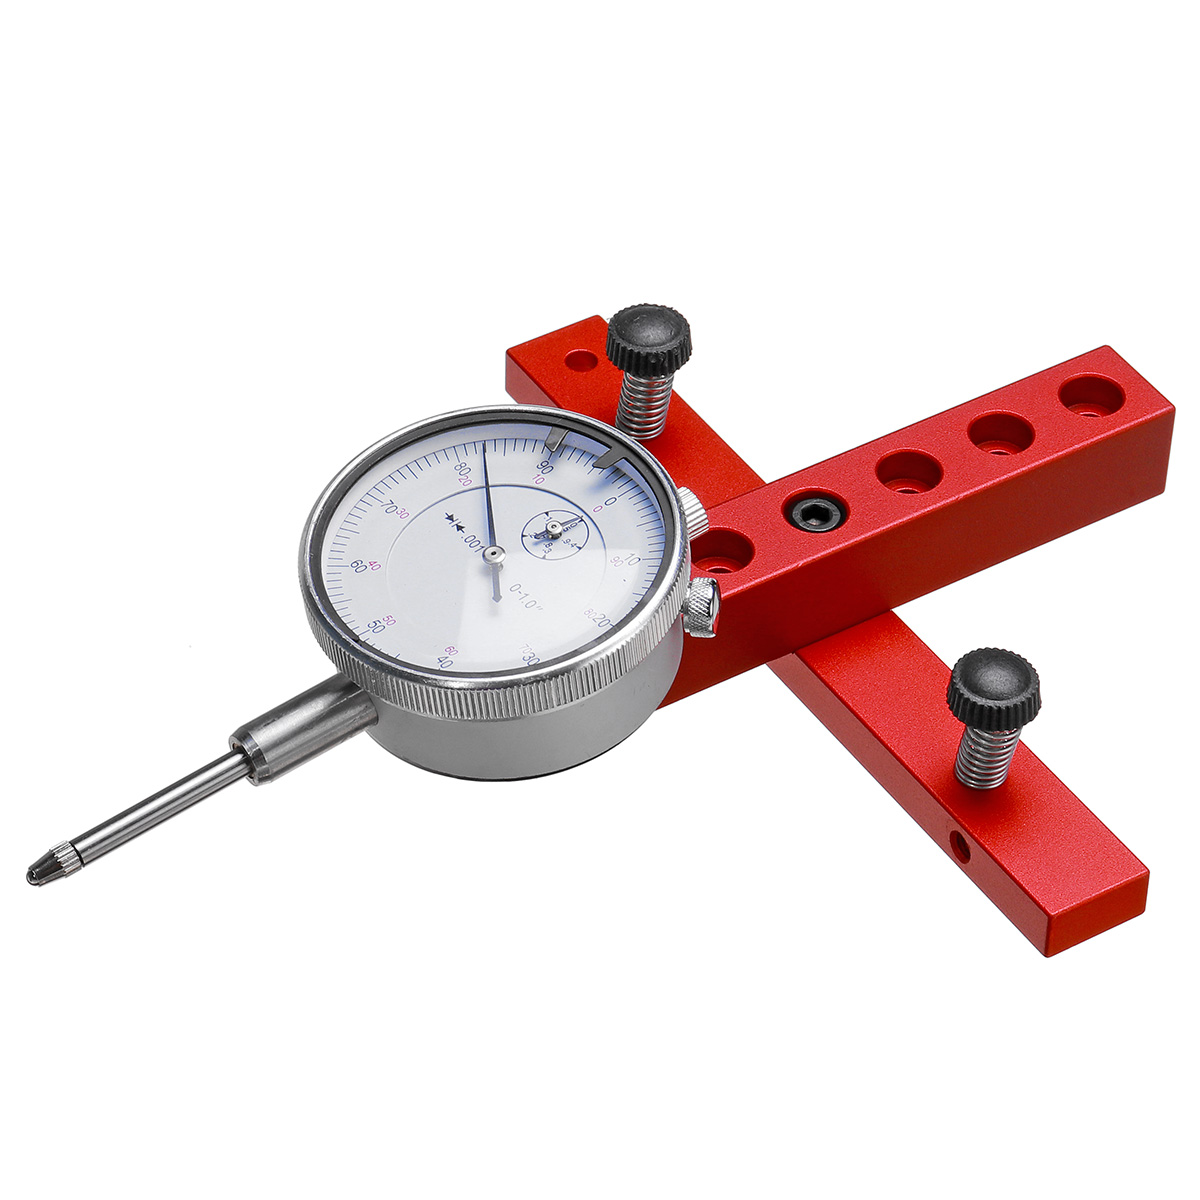 Dial-Test-Gauge-Table-Saws-Band-Saws-and-Drill-Dial-Indicator-For-Aligning-and-Calibrating-Machinery-1886163-1